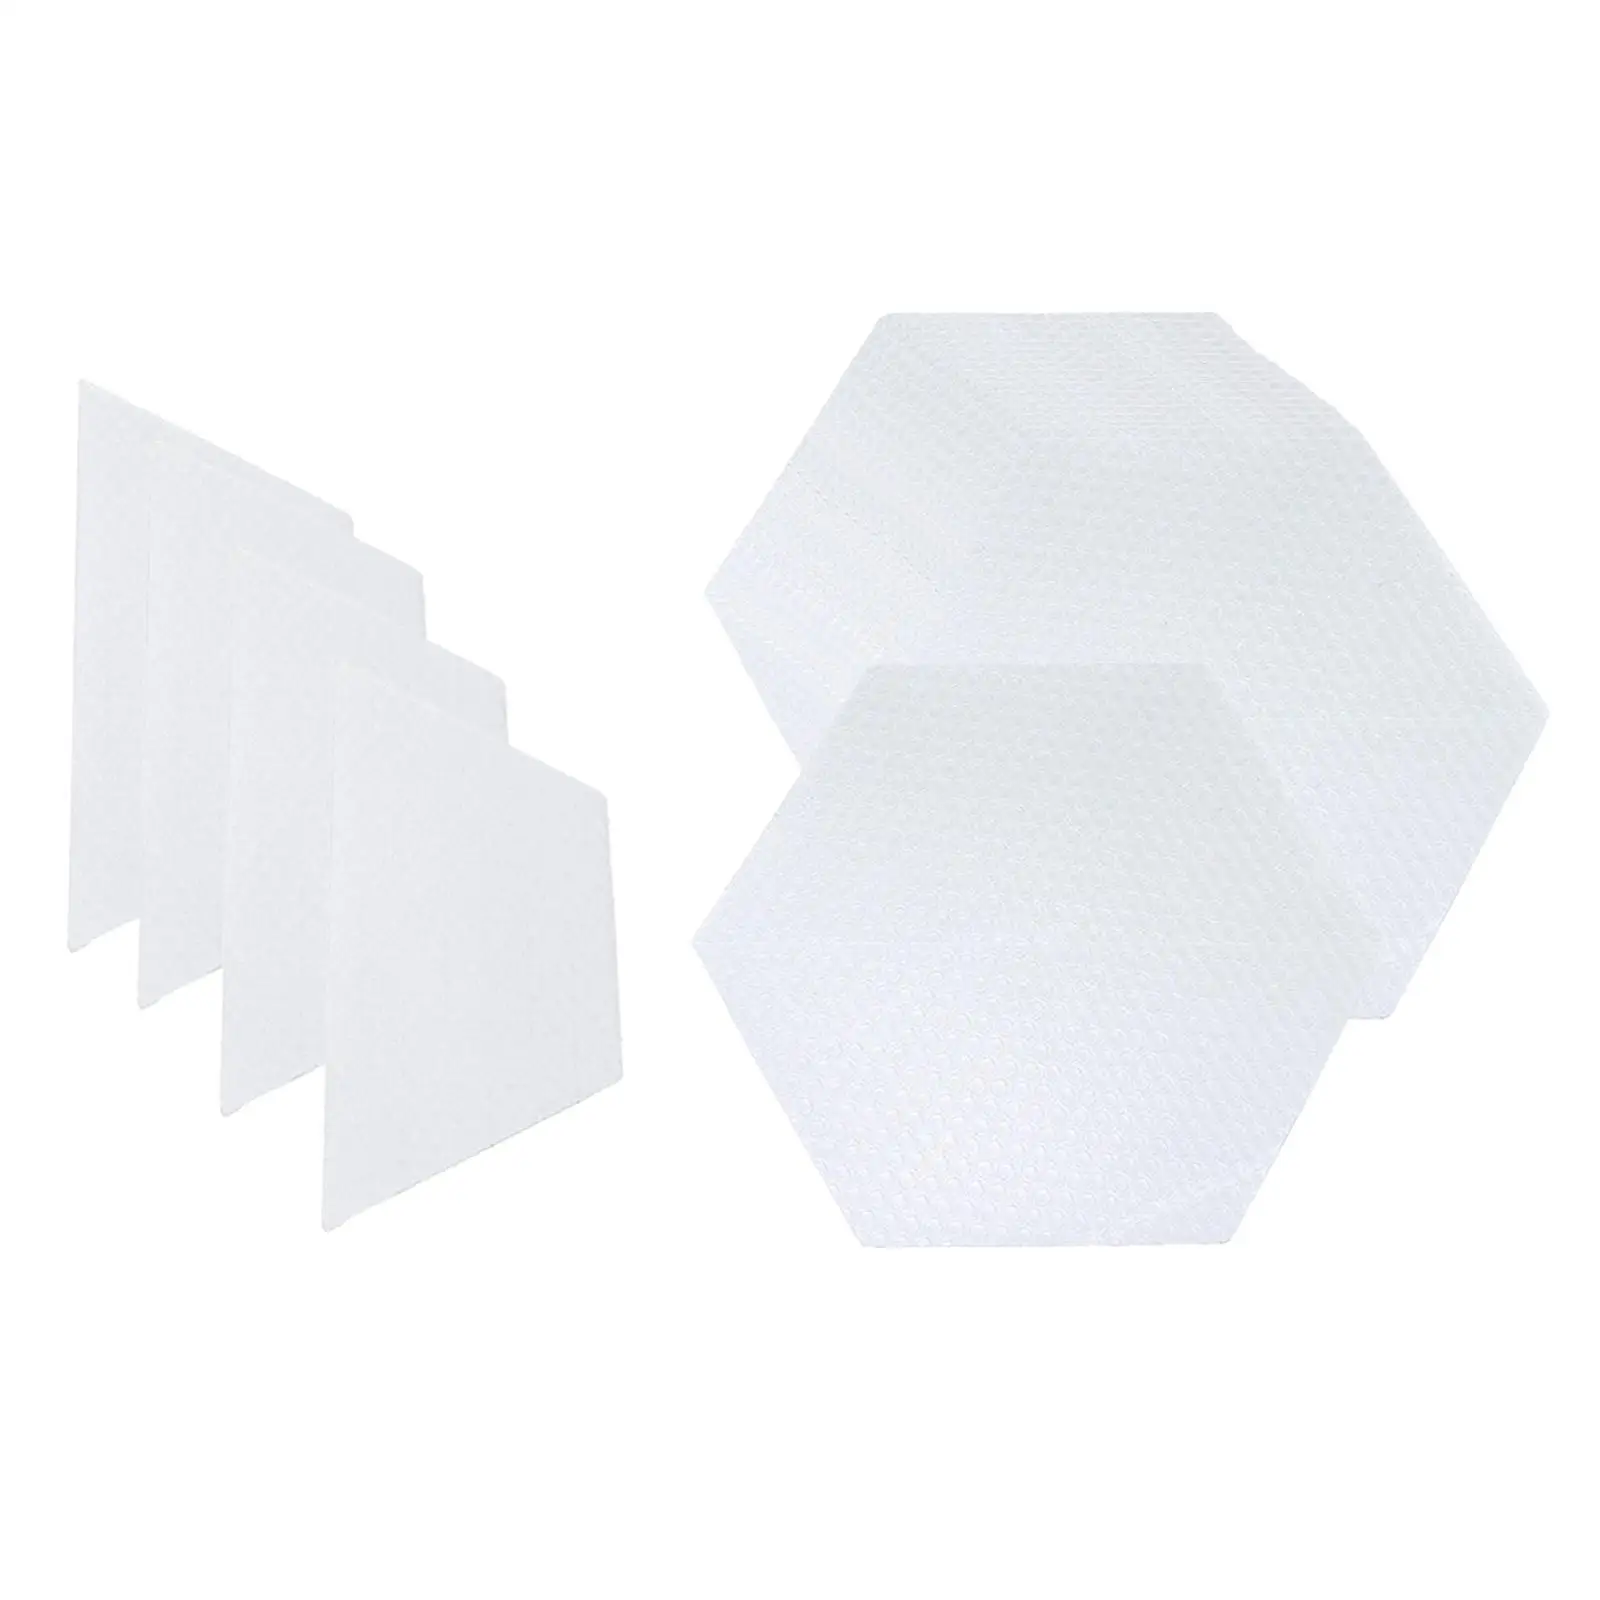 Surfboard Traction Pads  Tape Honeycomb Hole Waxless   Pads for  Board Water Surfing Accessories White